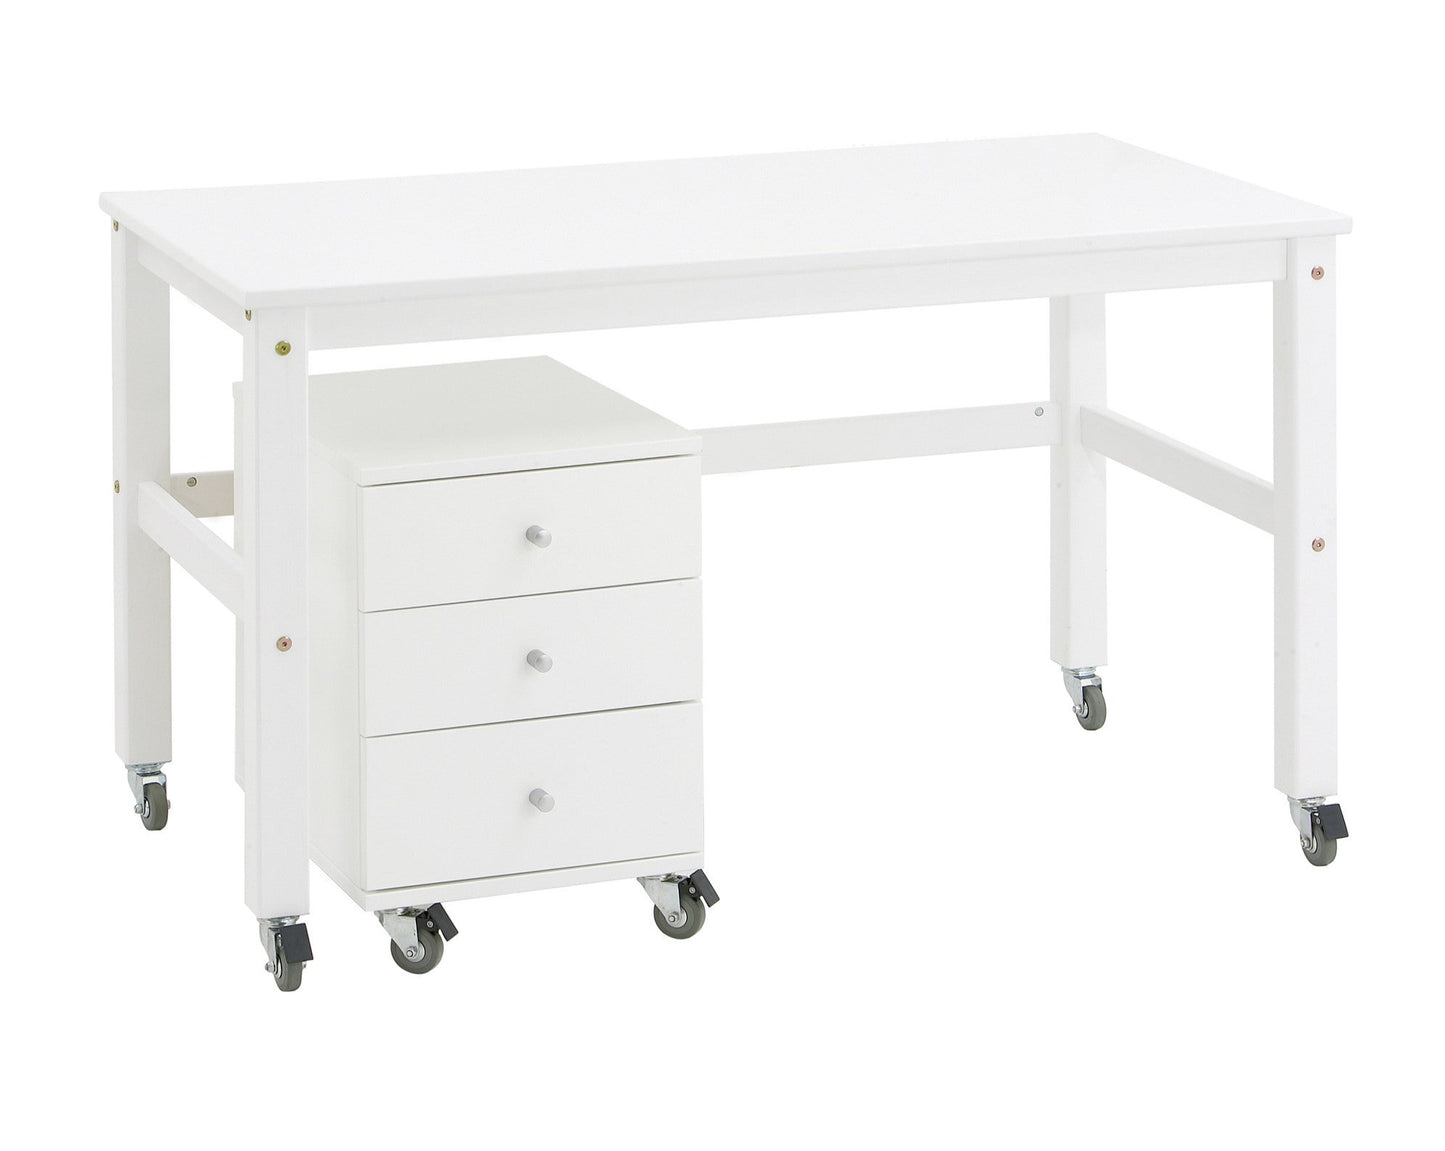 ECO Dream - Halfhigh bed with desk, drawer and bookshelf - 90x200cm - White